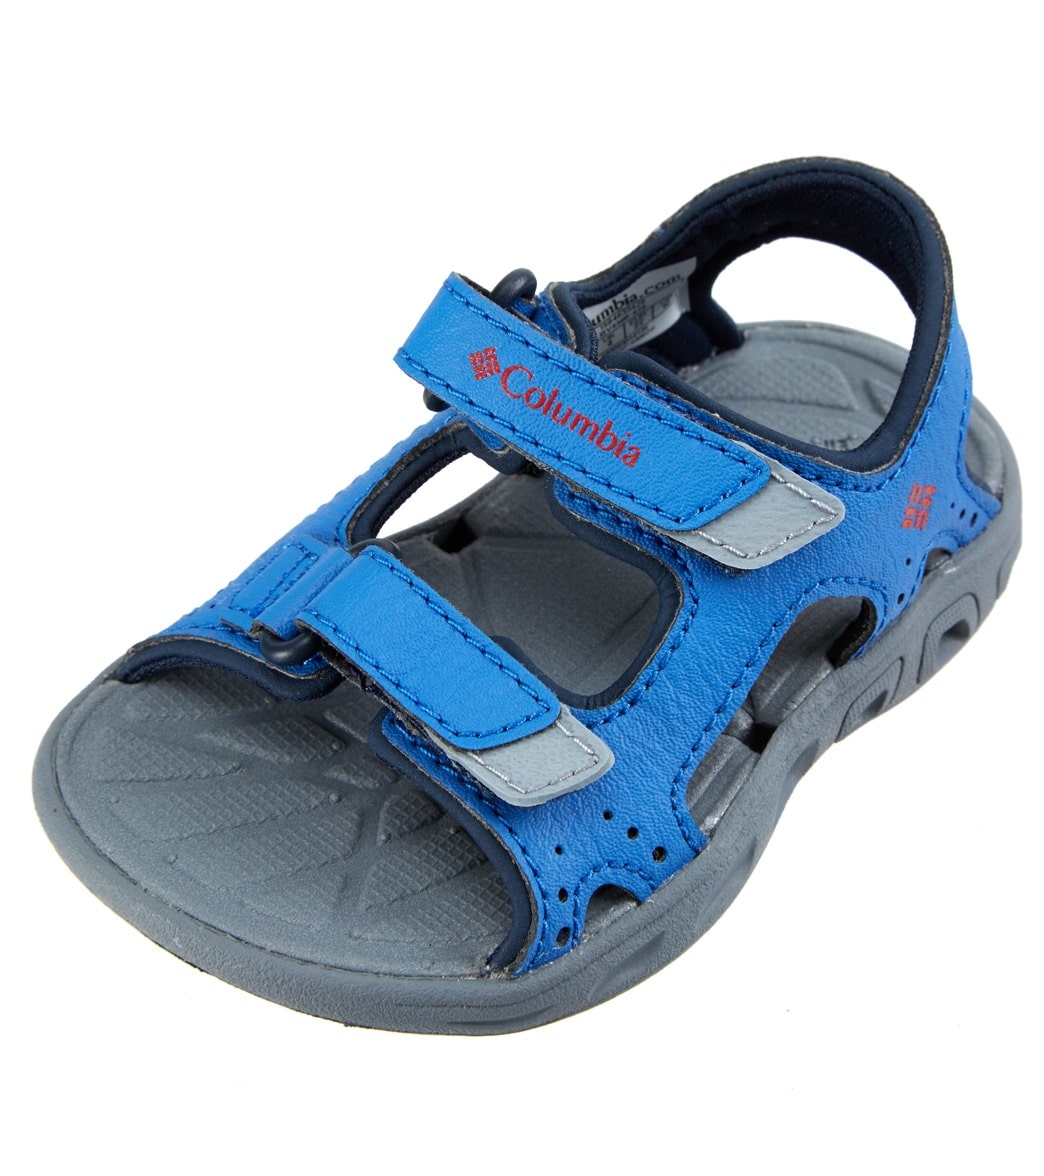 Columbia Toddler Techsun Vent Sandals - Stormy Blue/Mountain Red 4 - Swimoutlet.com